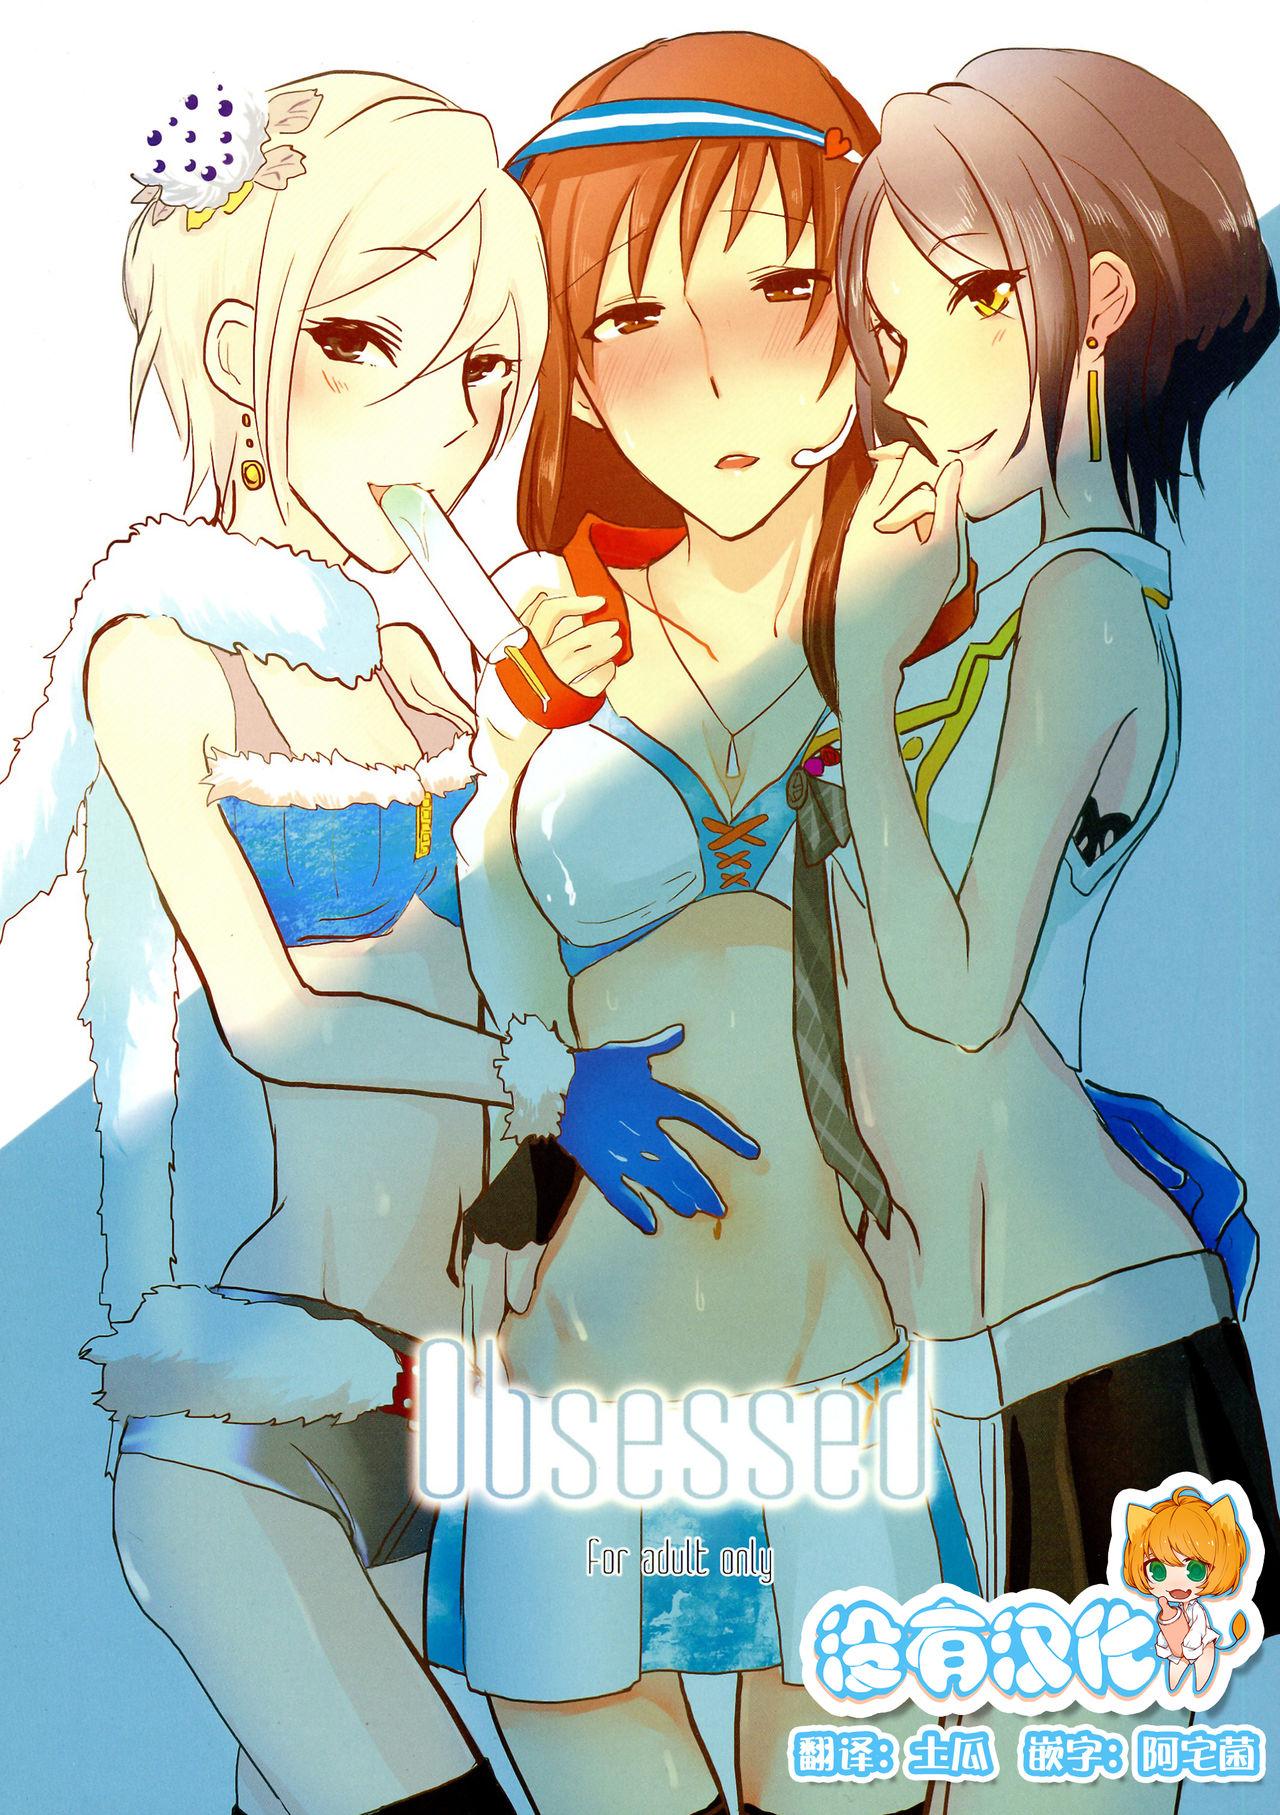 Solo obsessed - The idolmaster Unshaved - Page 1